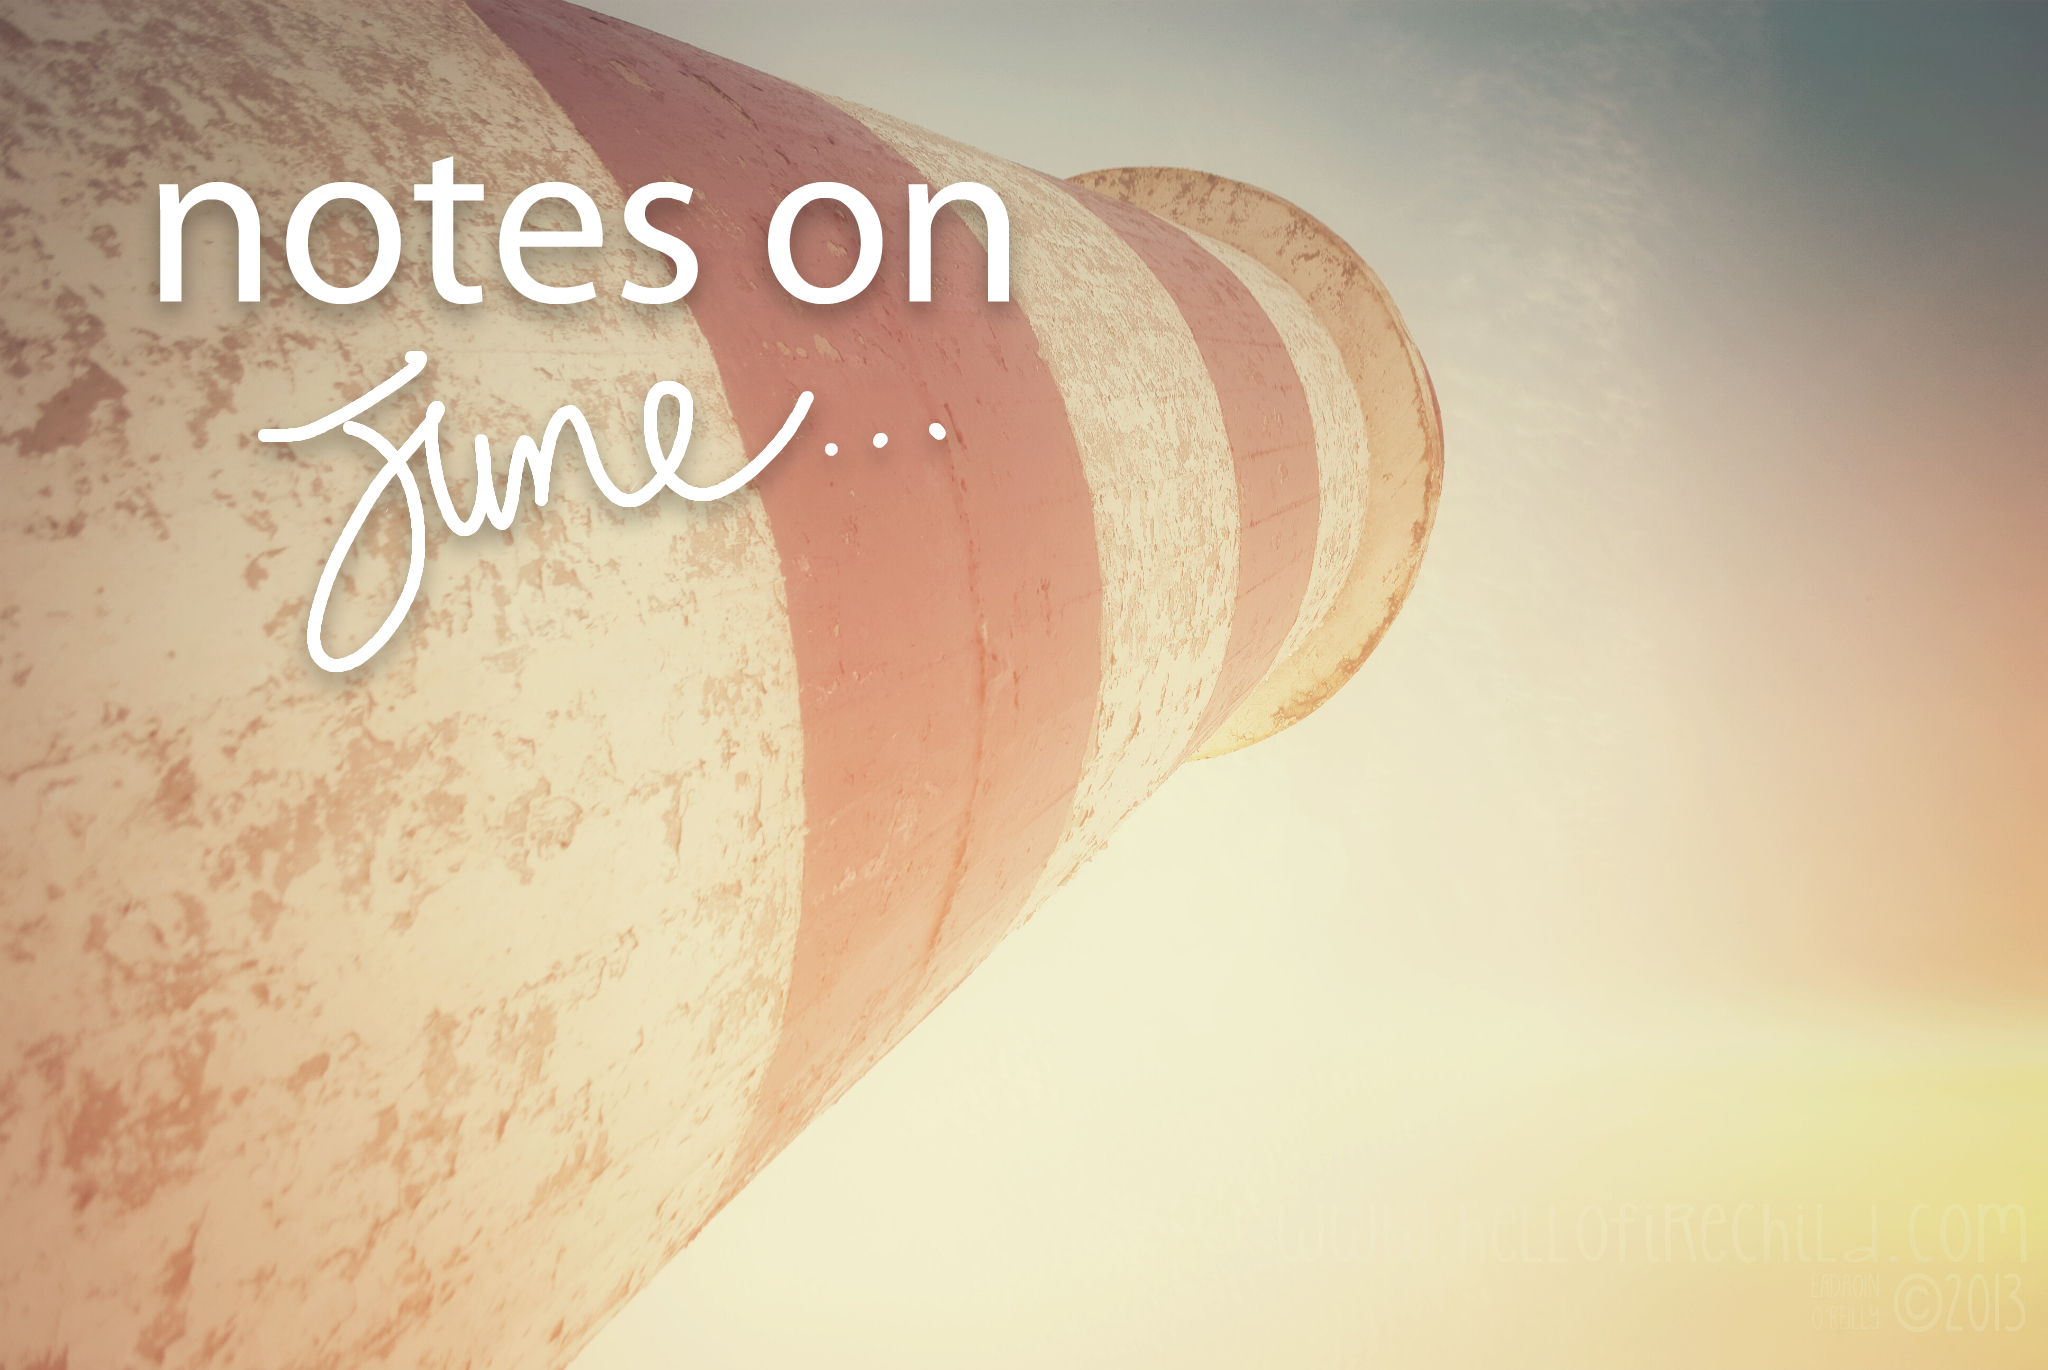 Notes on June